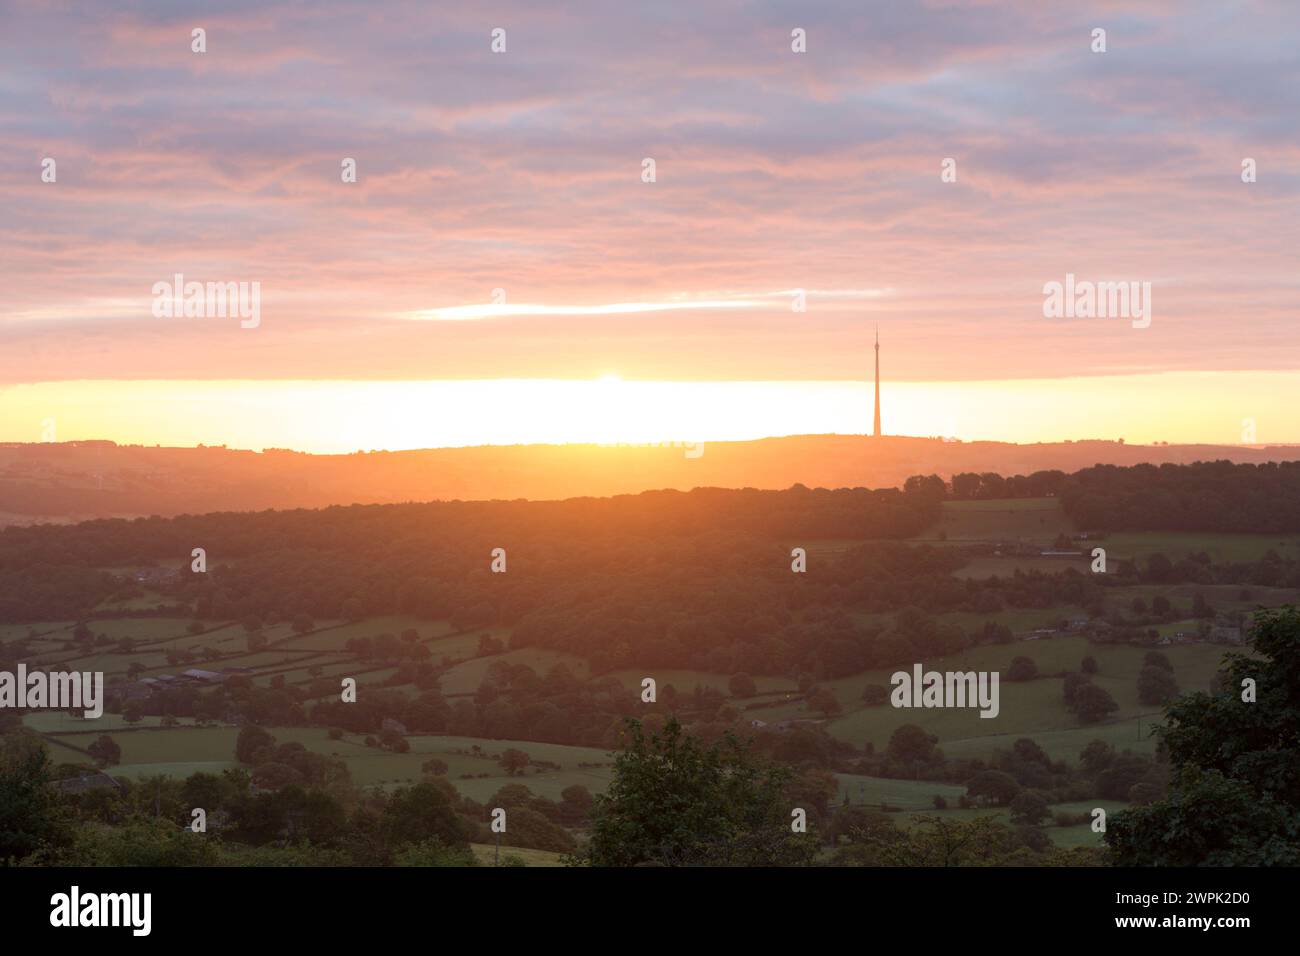 UK, West Yorkshire, sunrise over Emley Moor from Castle Hill. Stock Photo